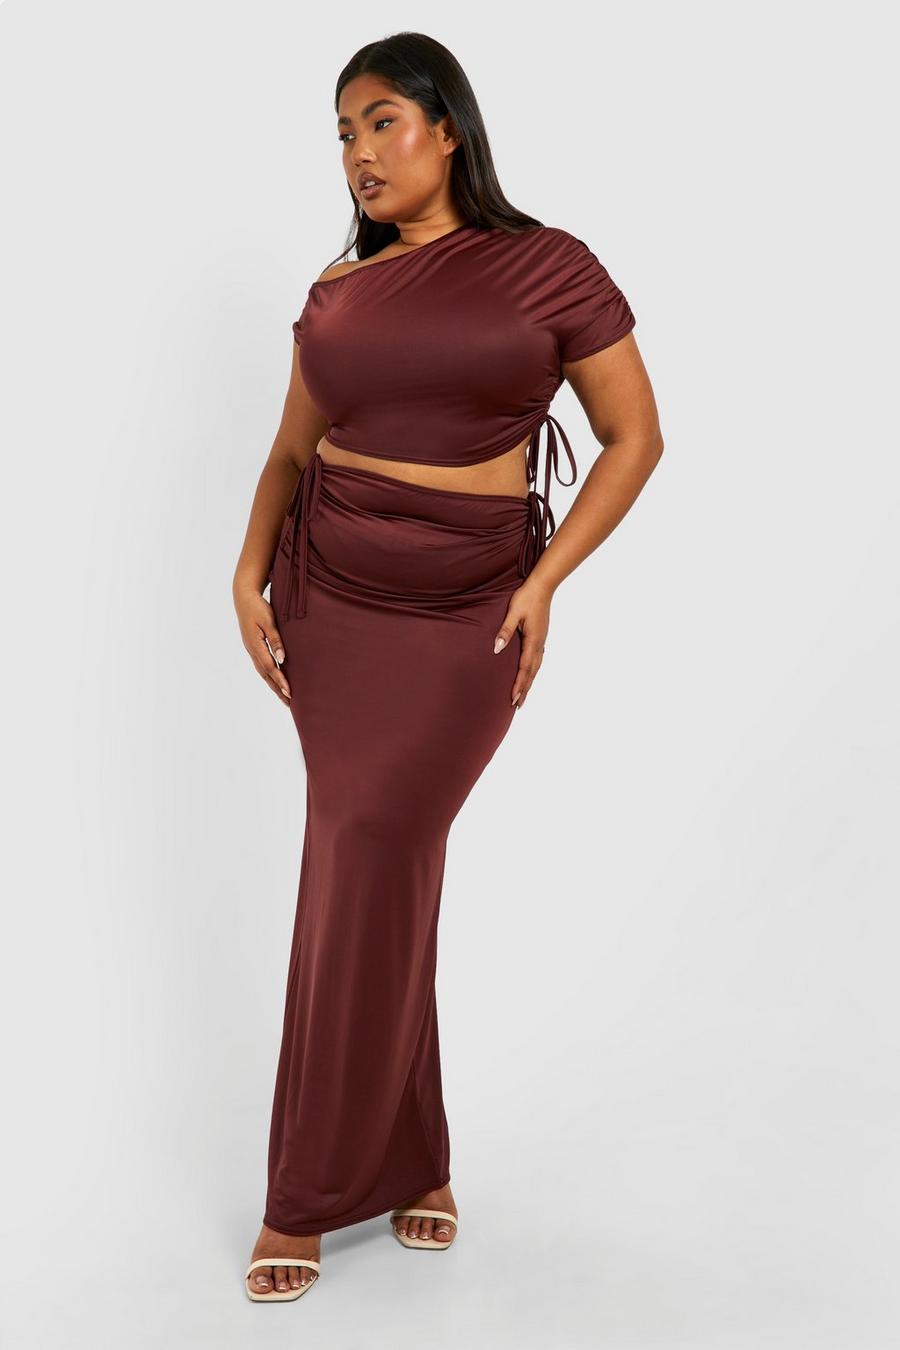 Crop top Plus Size drappeggiato con ruches sulle spalle & gonna maxi, Cherry image number 1